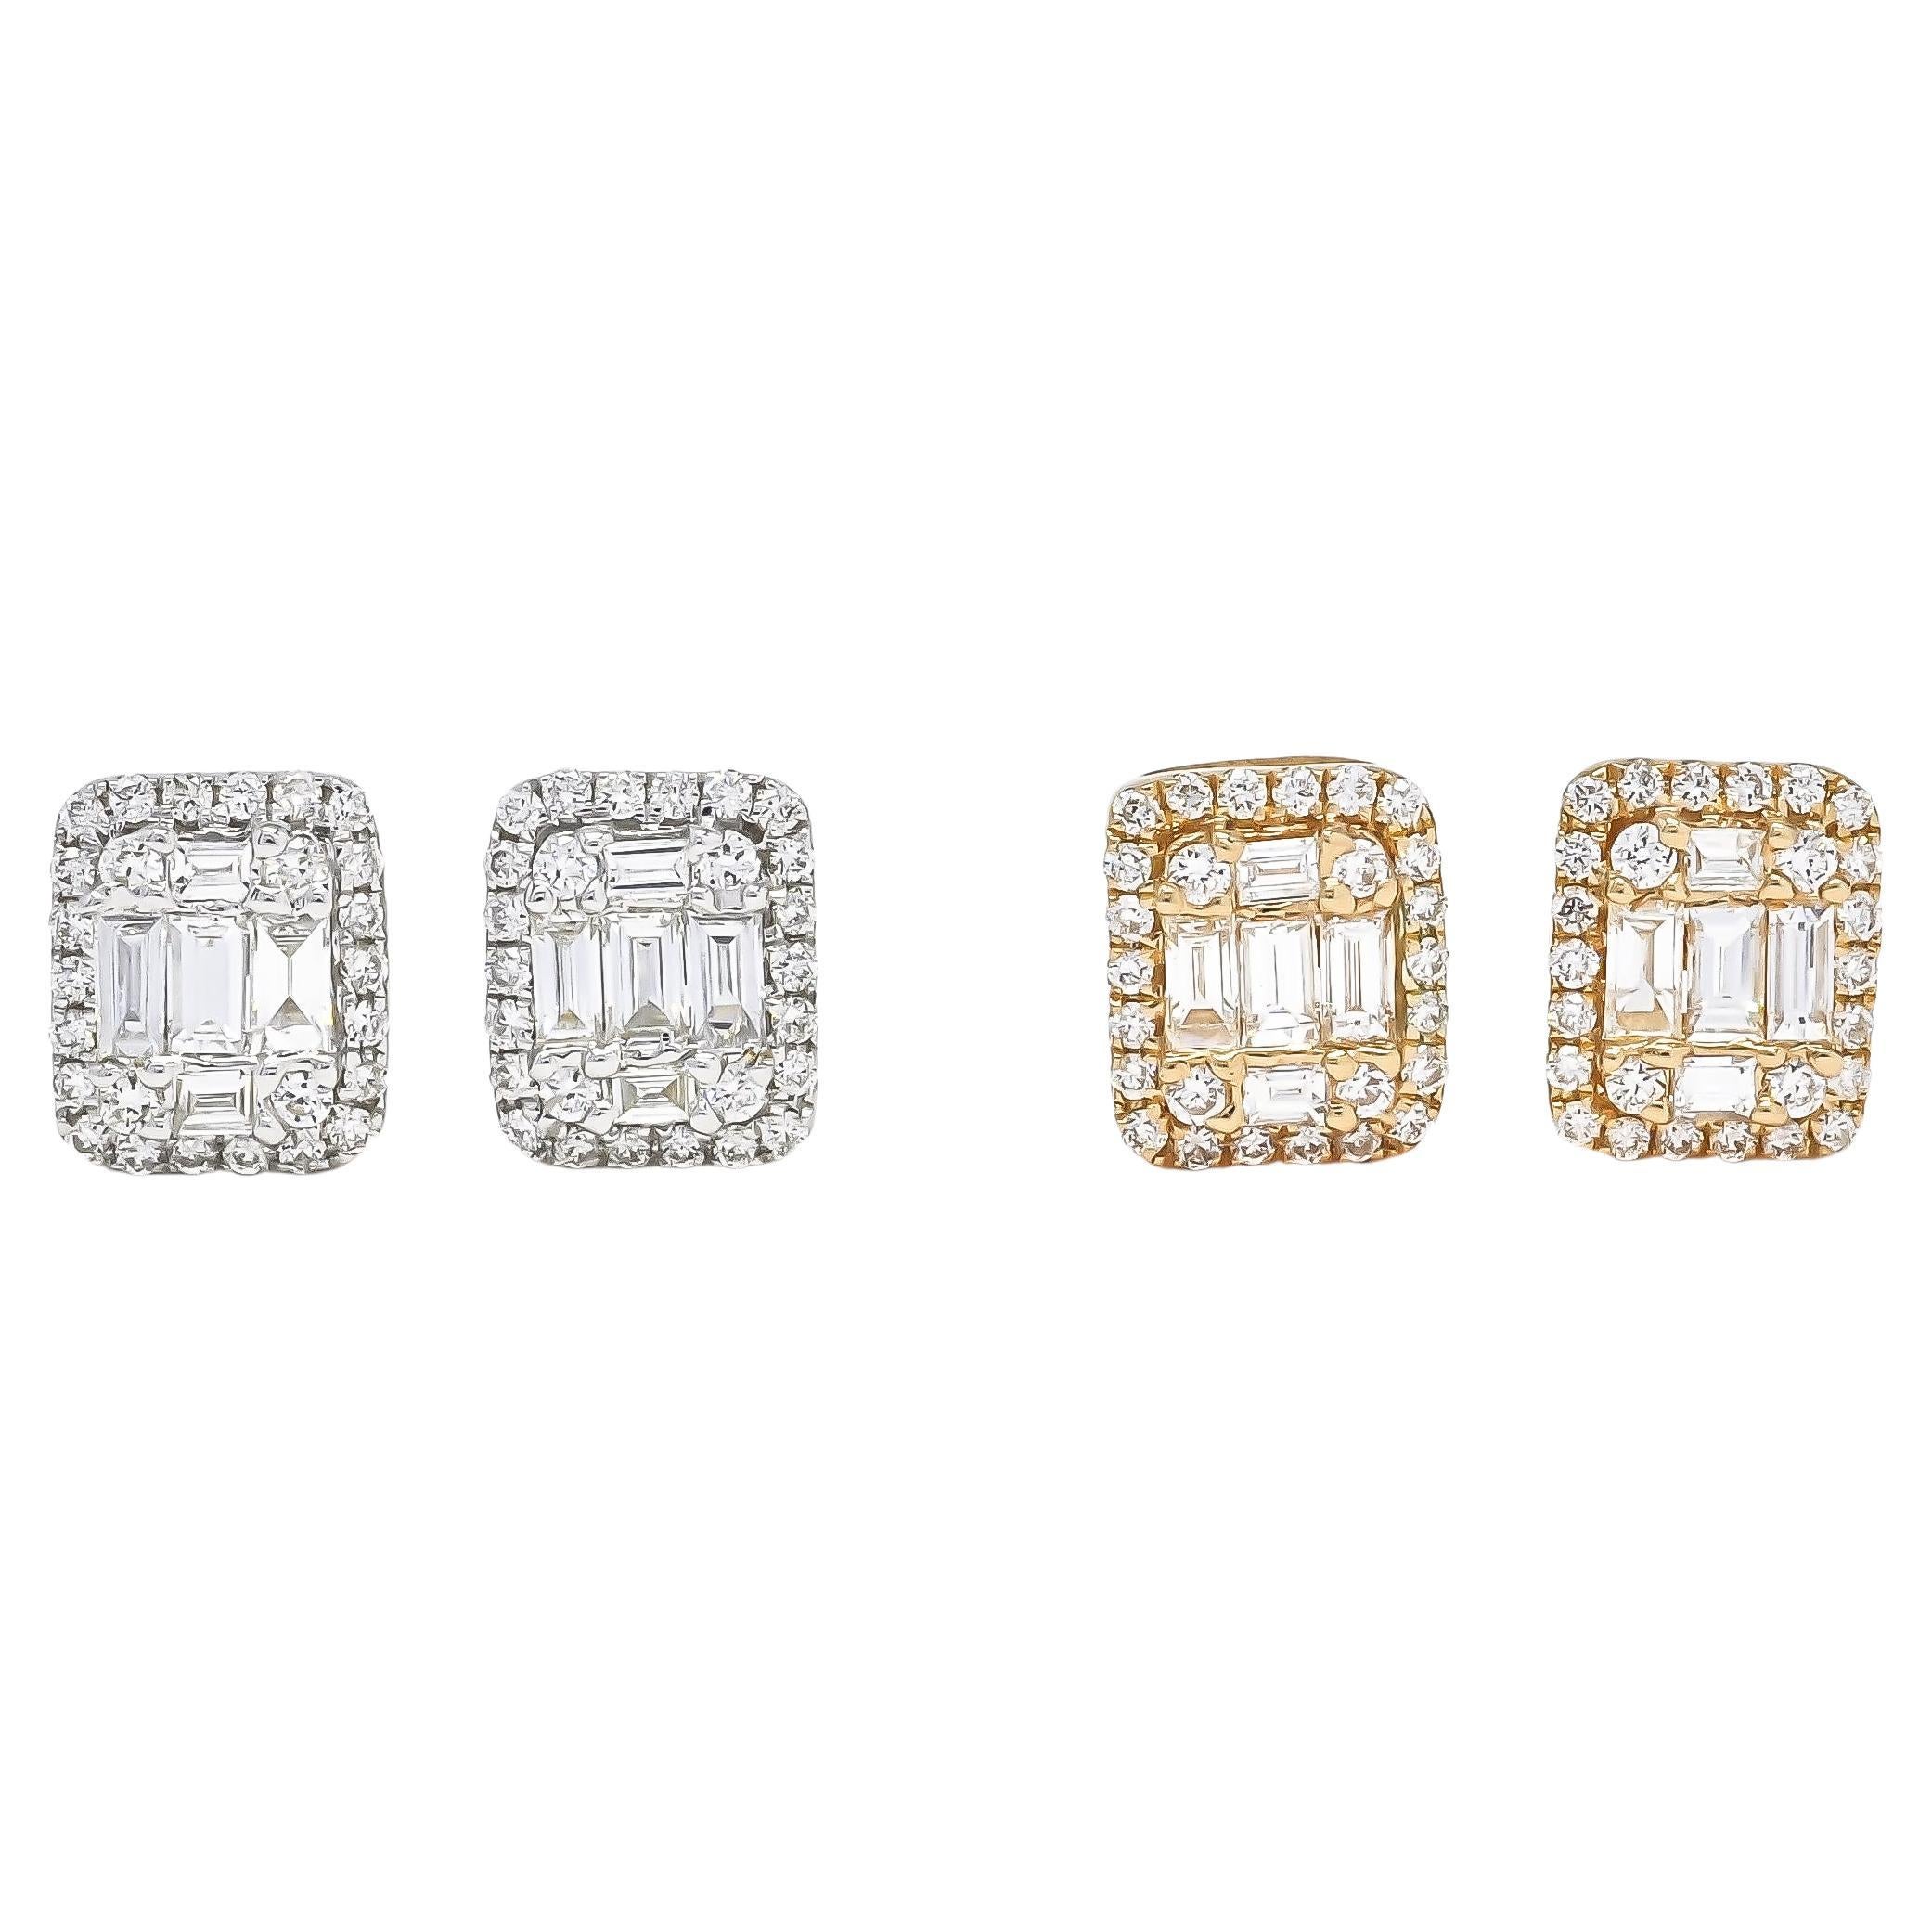 The Baguette and Round Diamond 18 KT Gold Cluster Halo Stud Earrings are the perfect accessory for any woman looking to add a touch of elegance and glamour to her evening wear or to mark a special anniversary.

These stunning earrings feature a